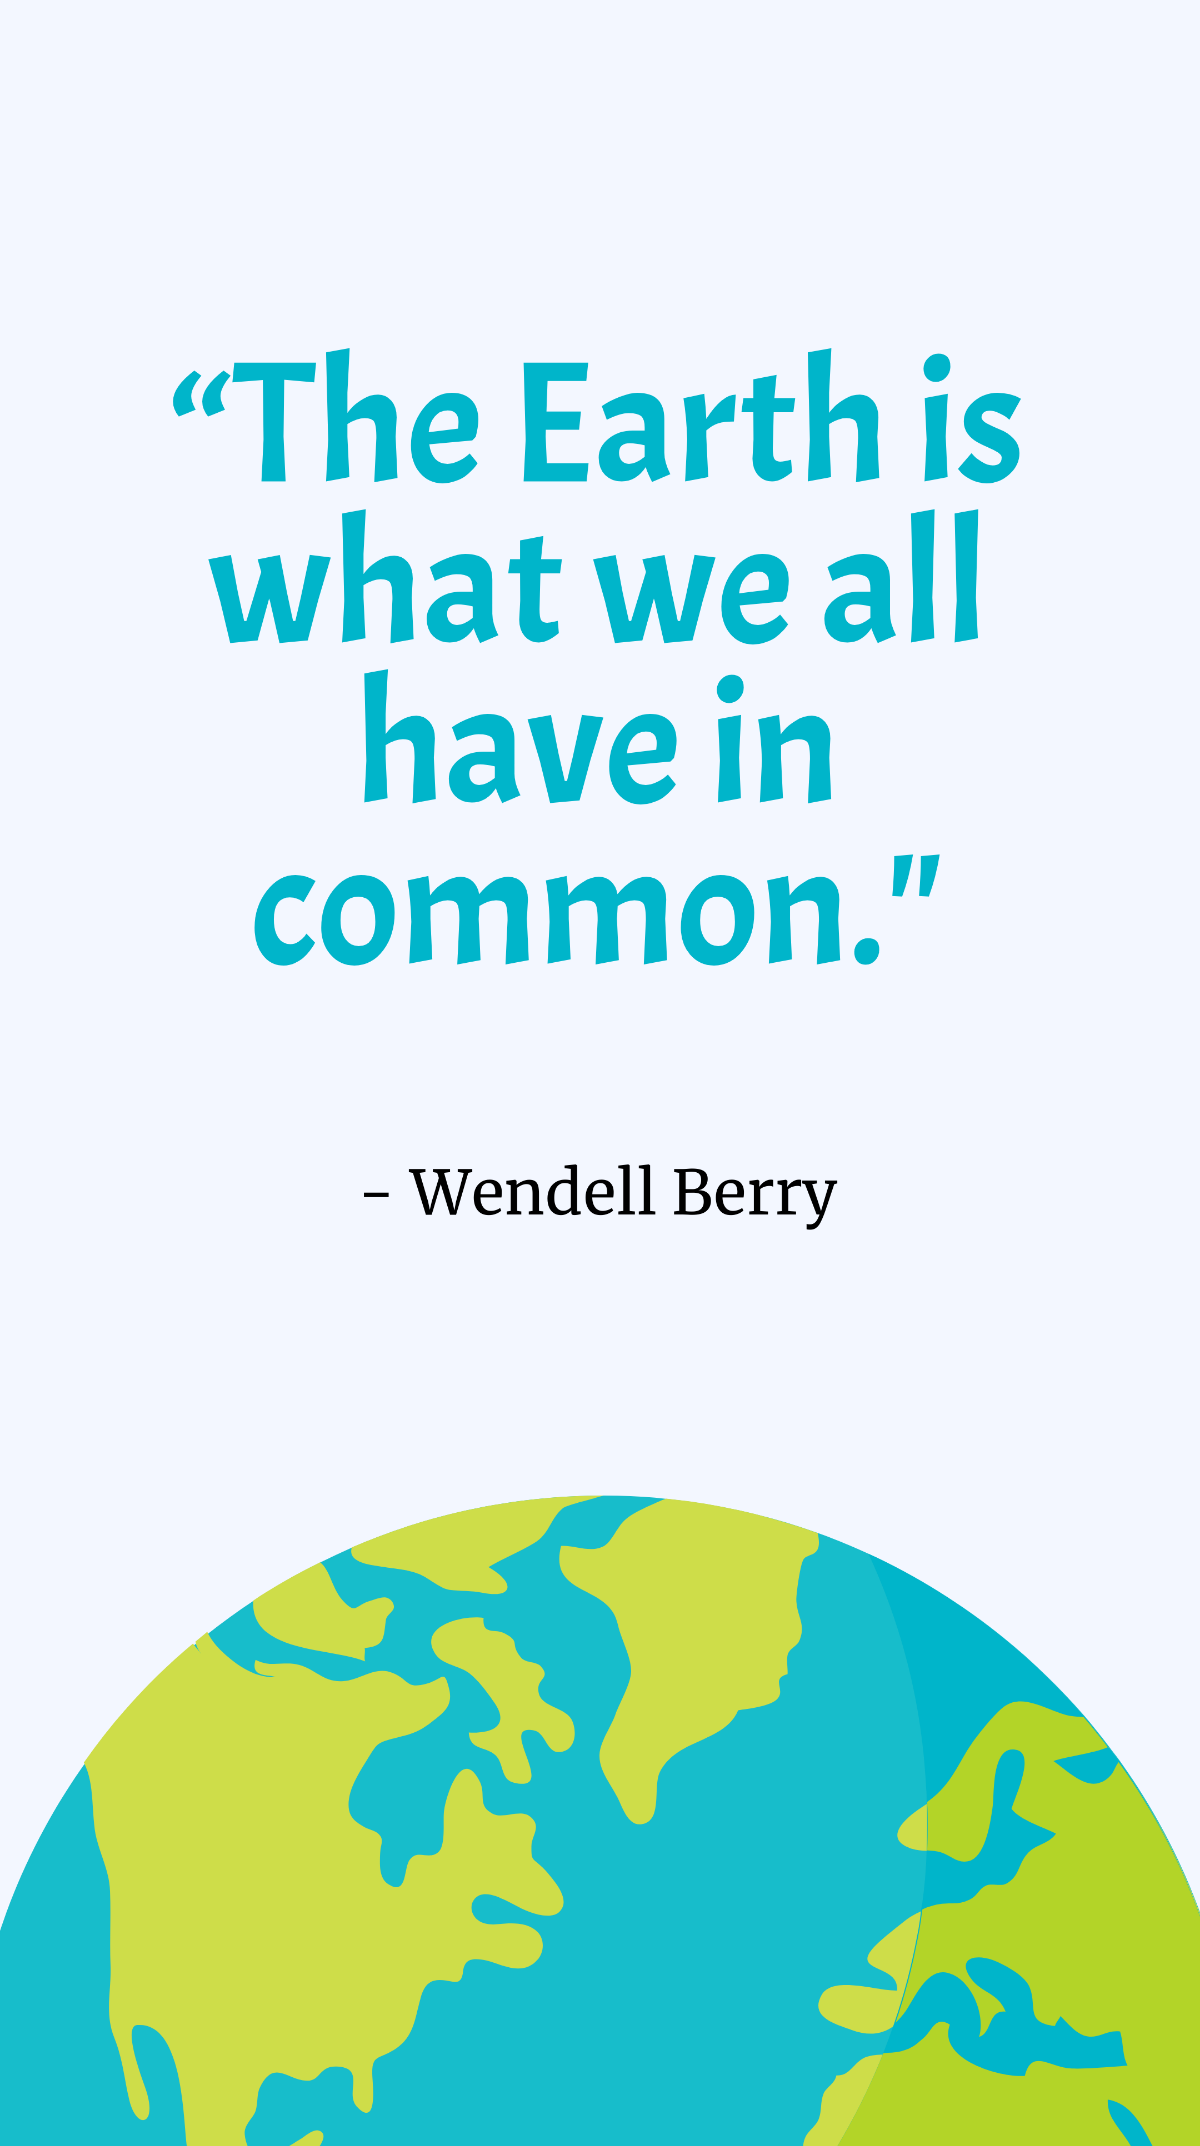 Wendell Berry - “The Earth is what we all have in common.